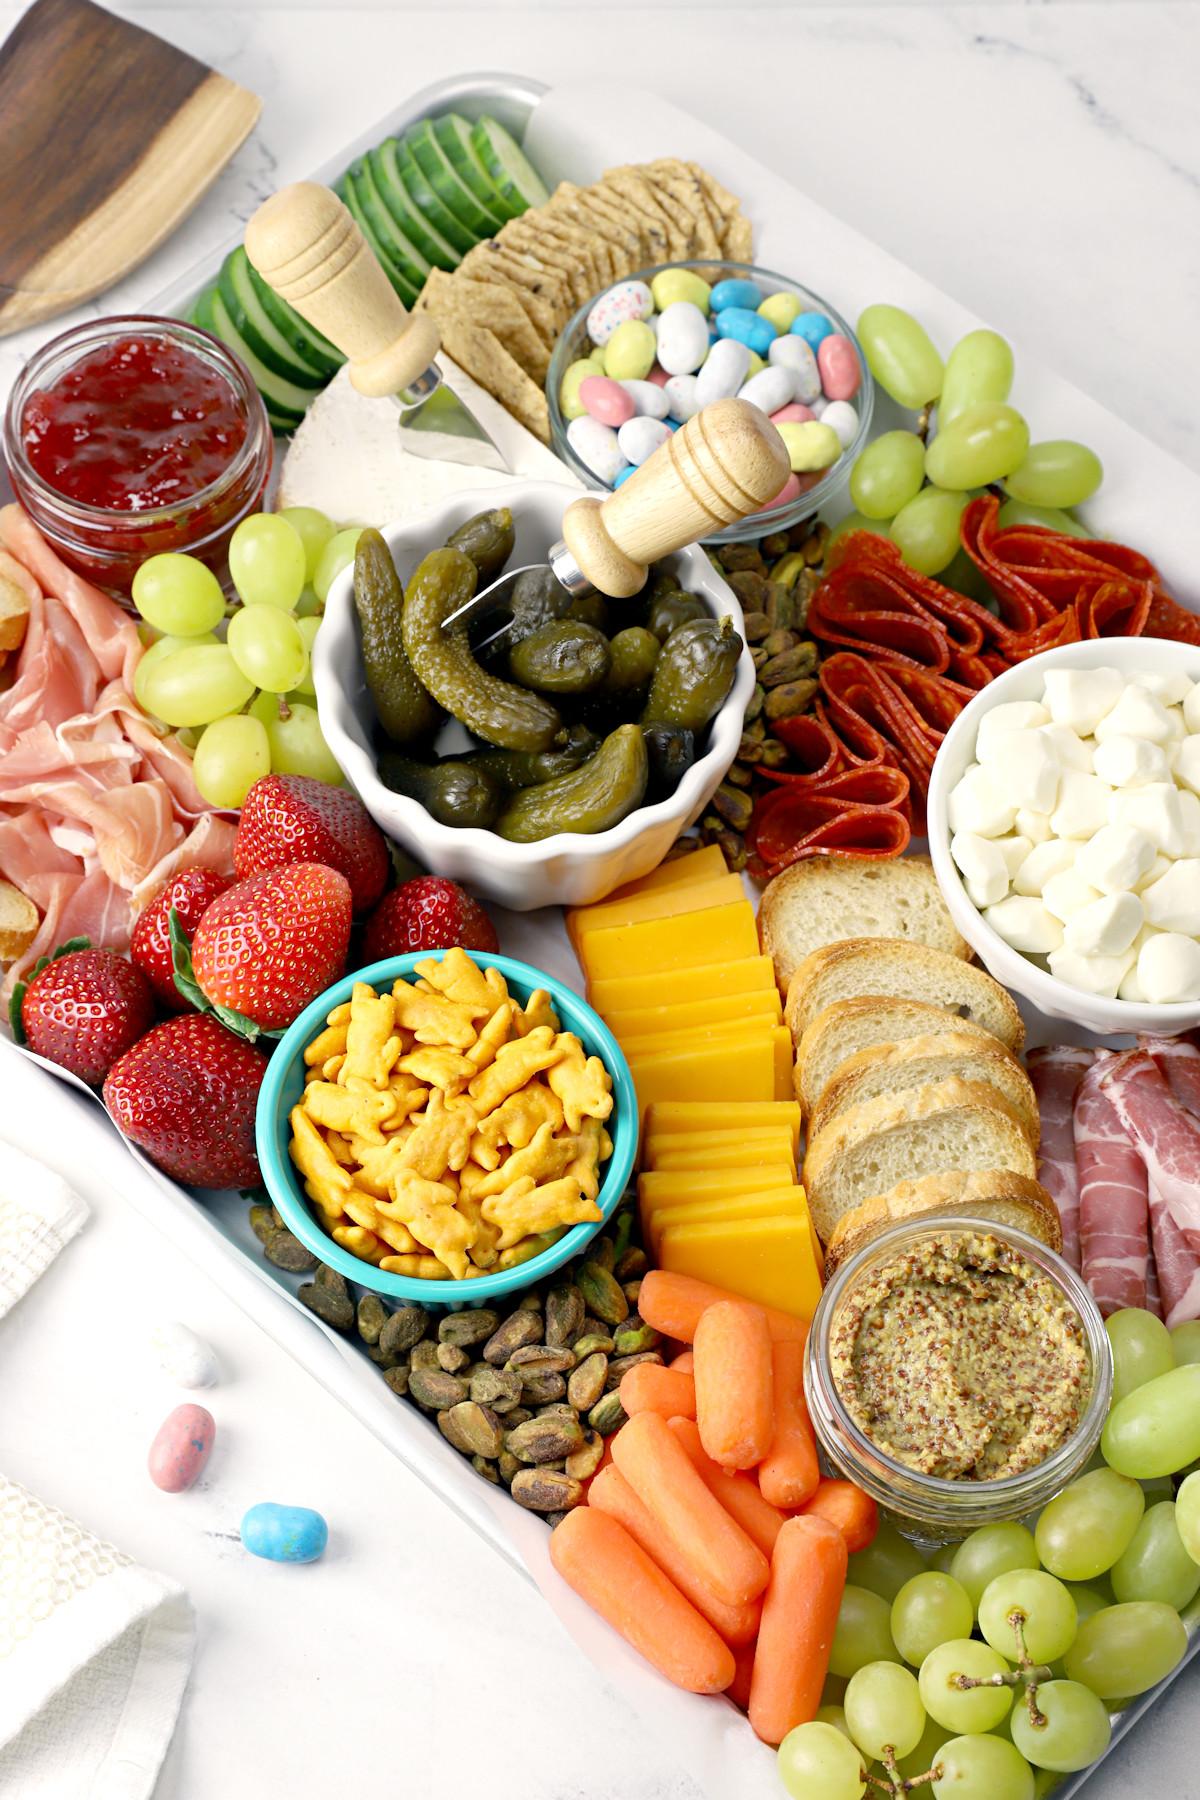 Easter charcuterie board with pickles, grapes, strawberries, meats, crackers, carrots, breads, and jam.